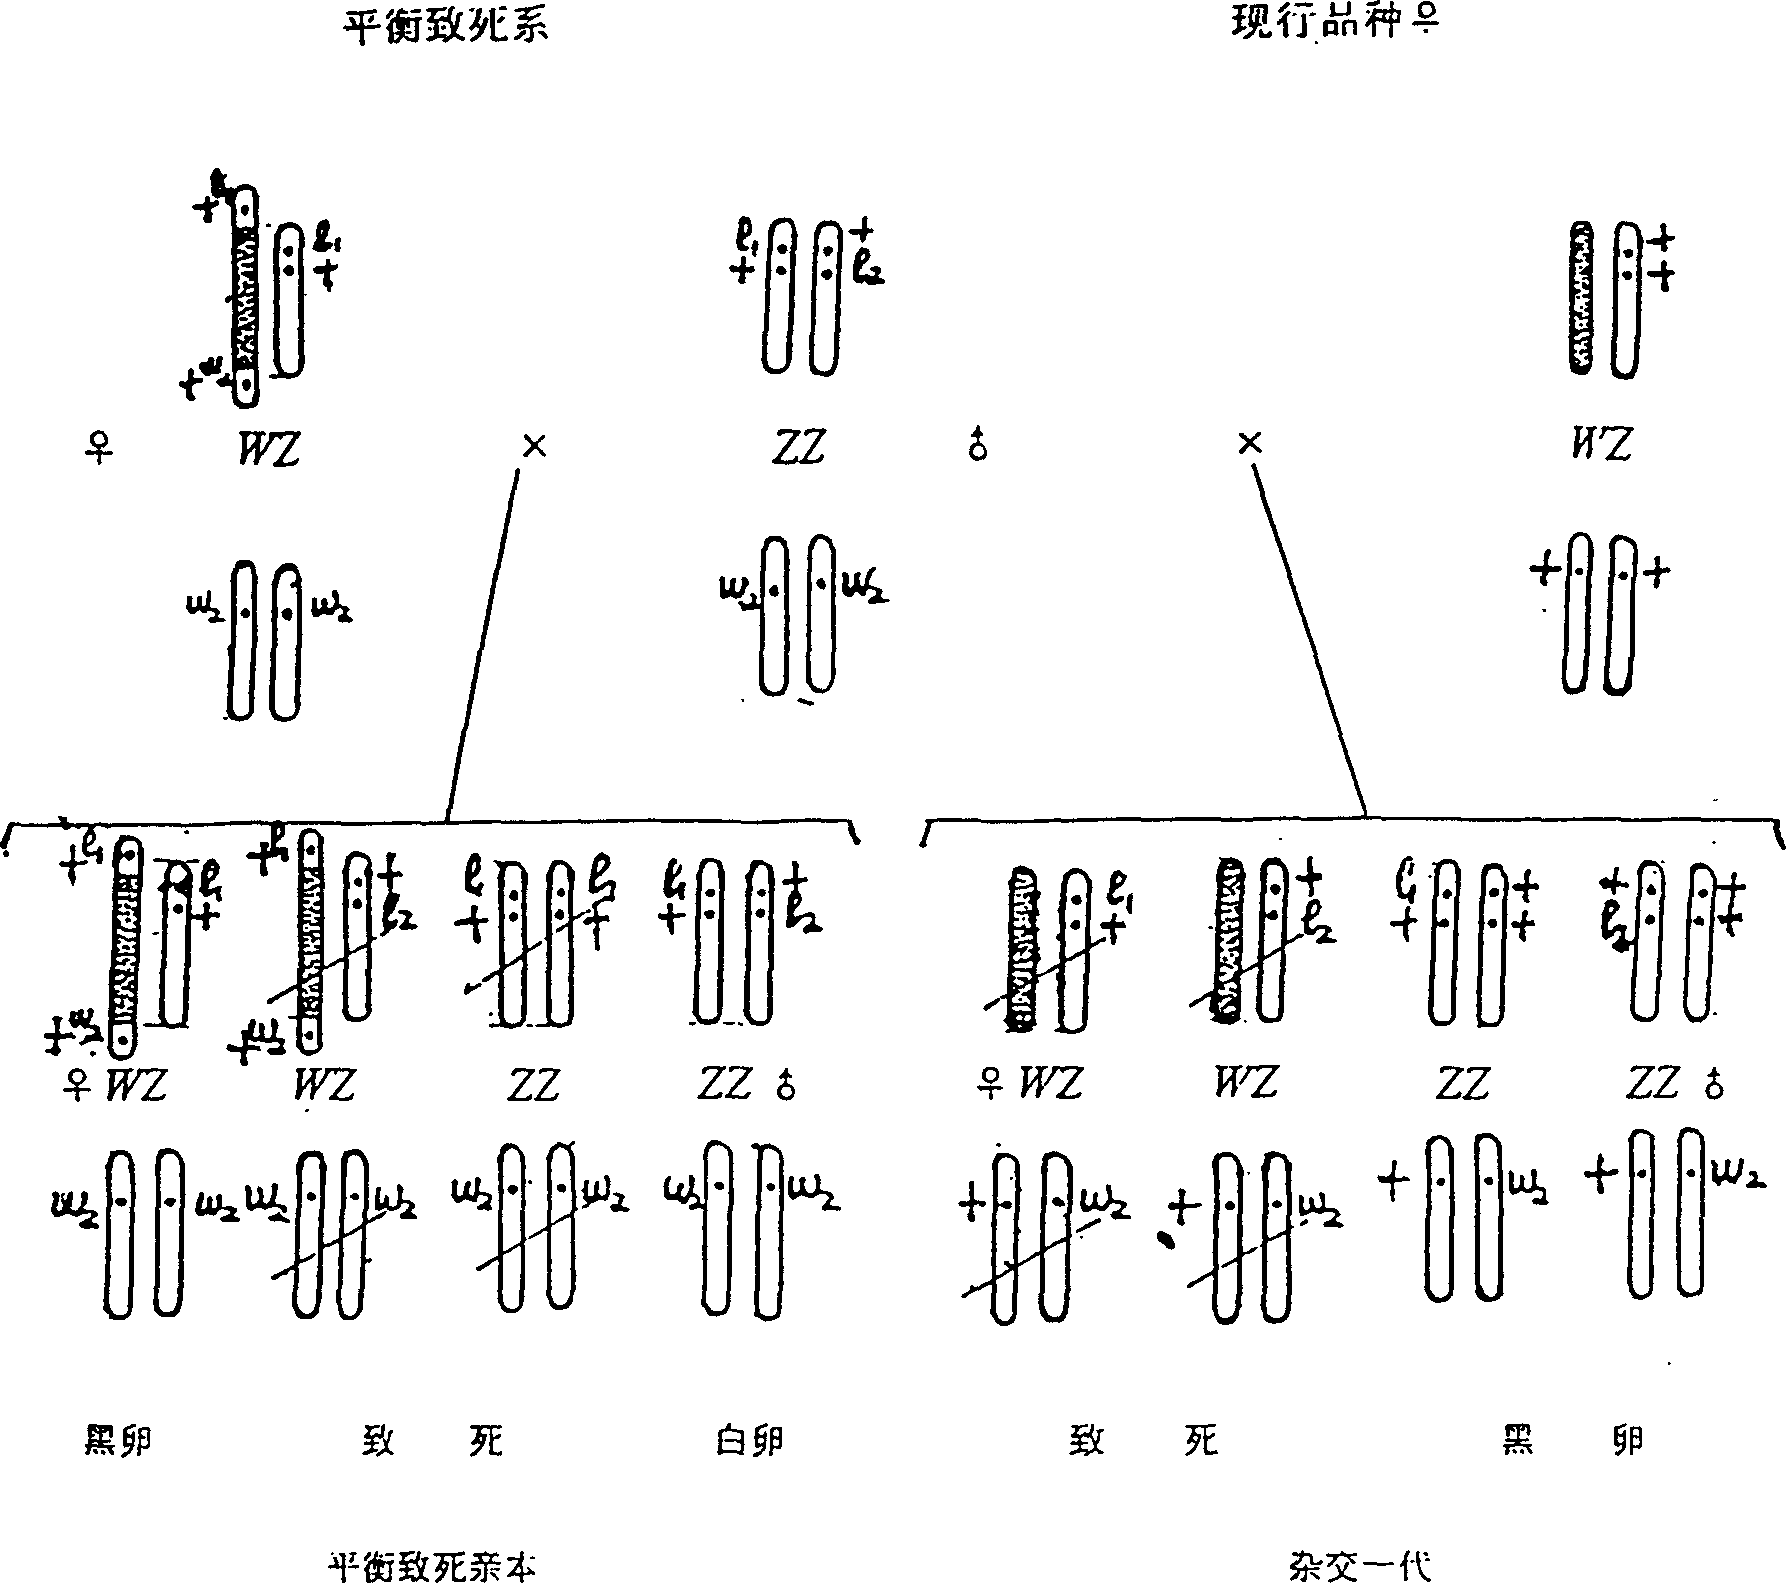 Implantation method of sex-linked balance lethal and sex control gene for Bombyx mori